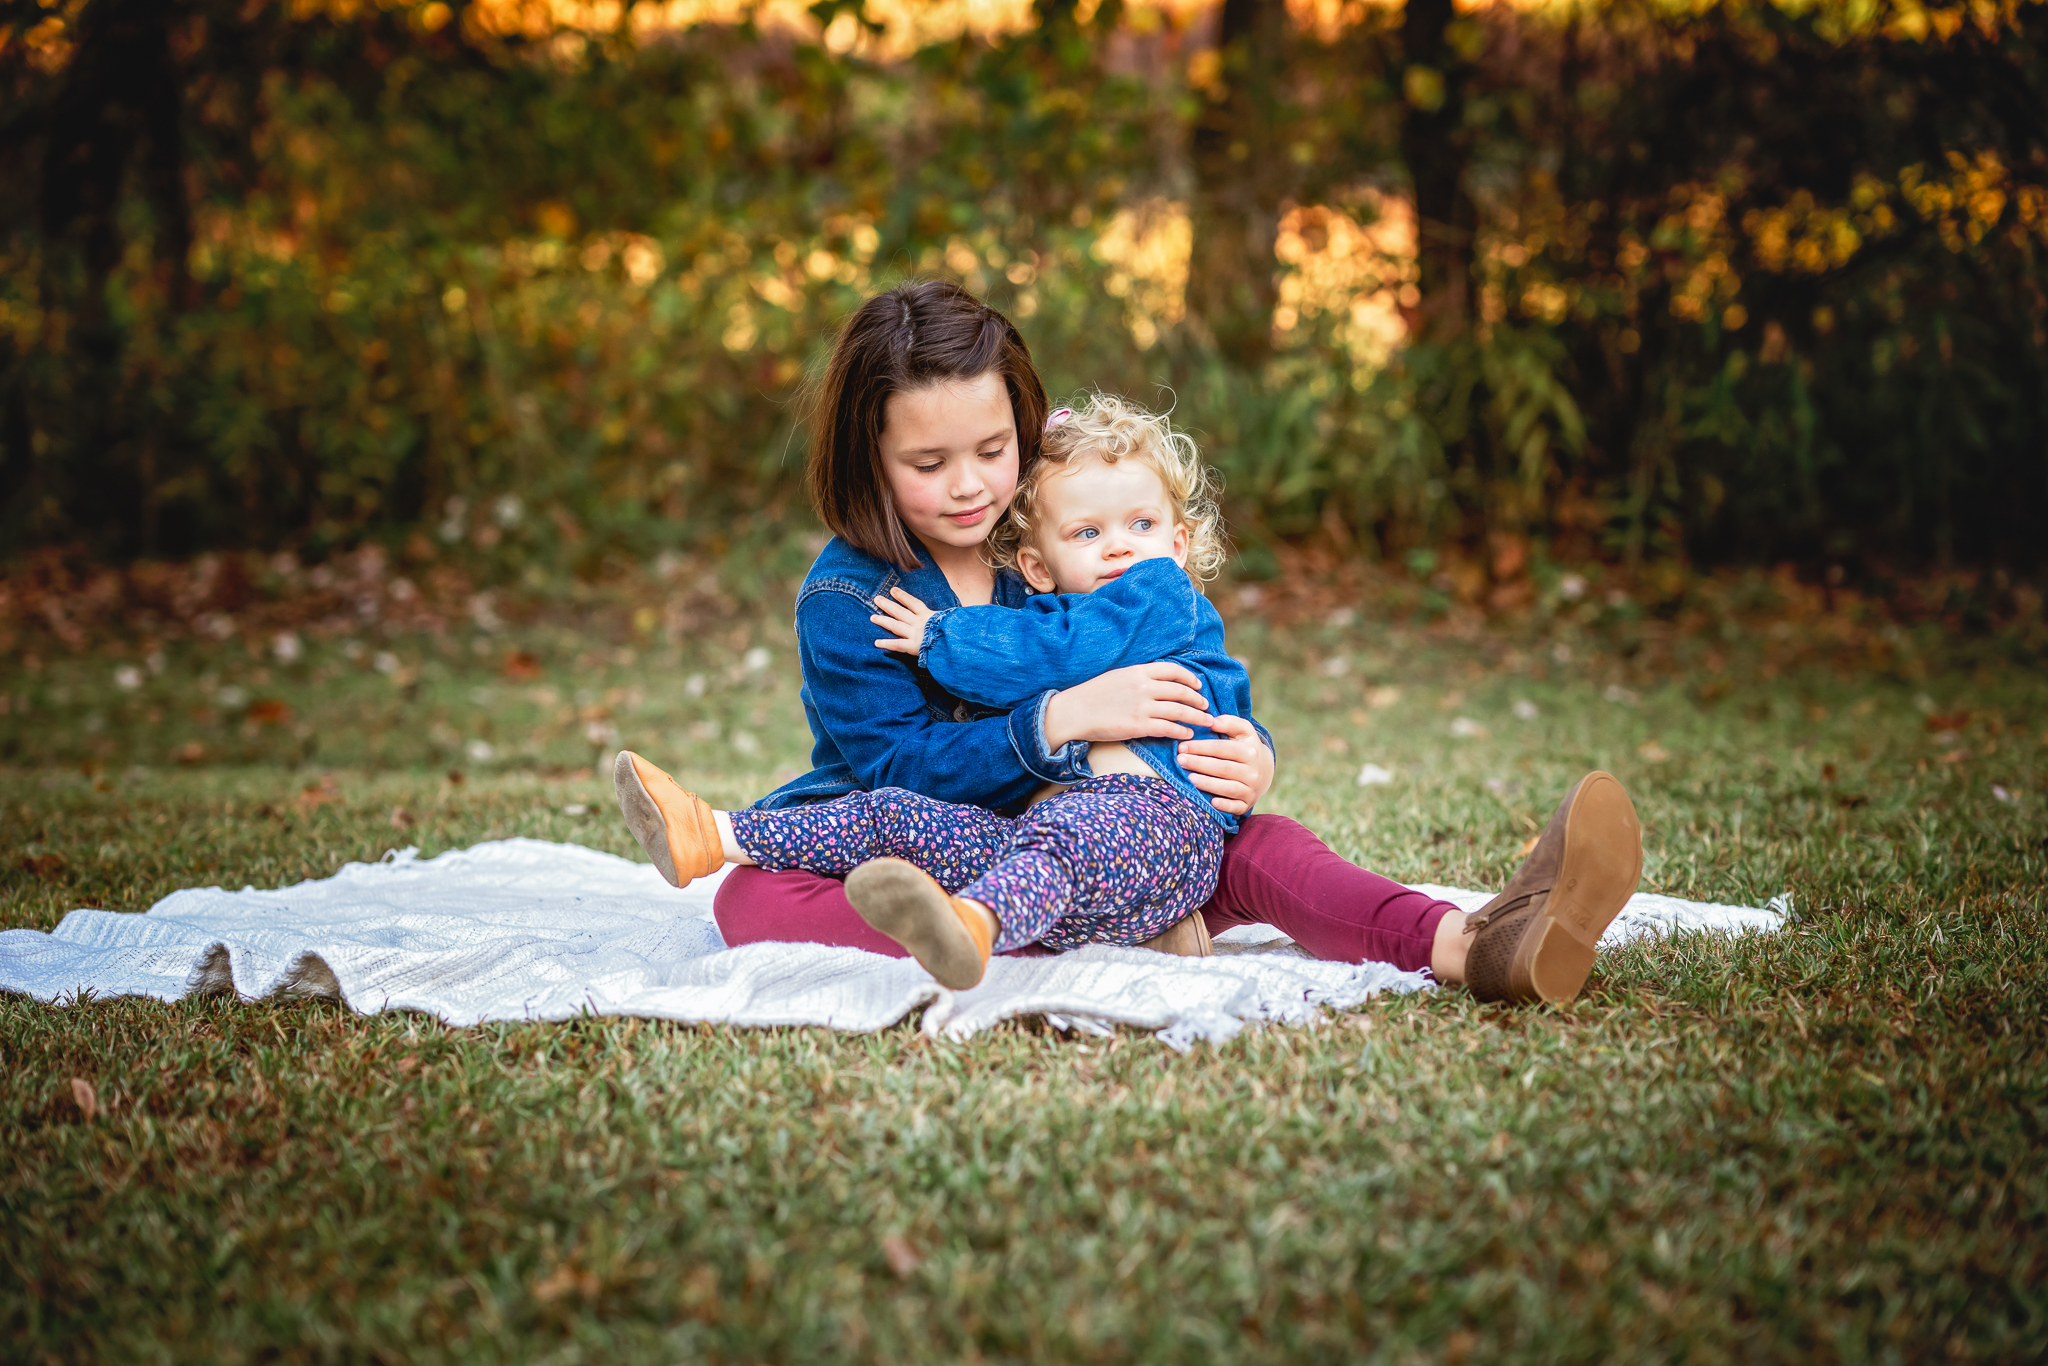 Two young sisters are sitting in a field and cuddling each other.